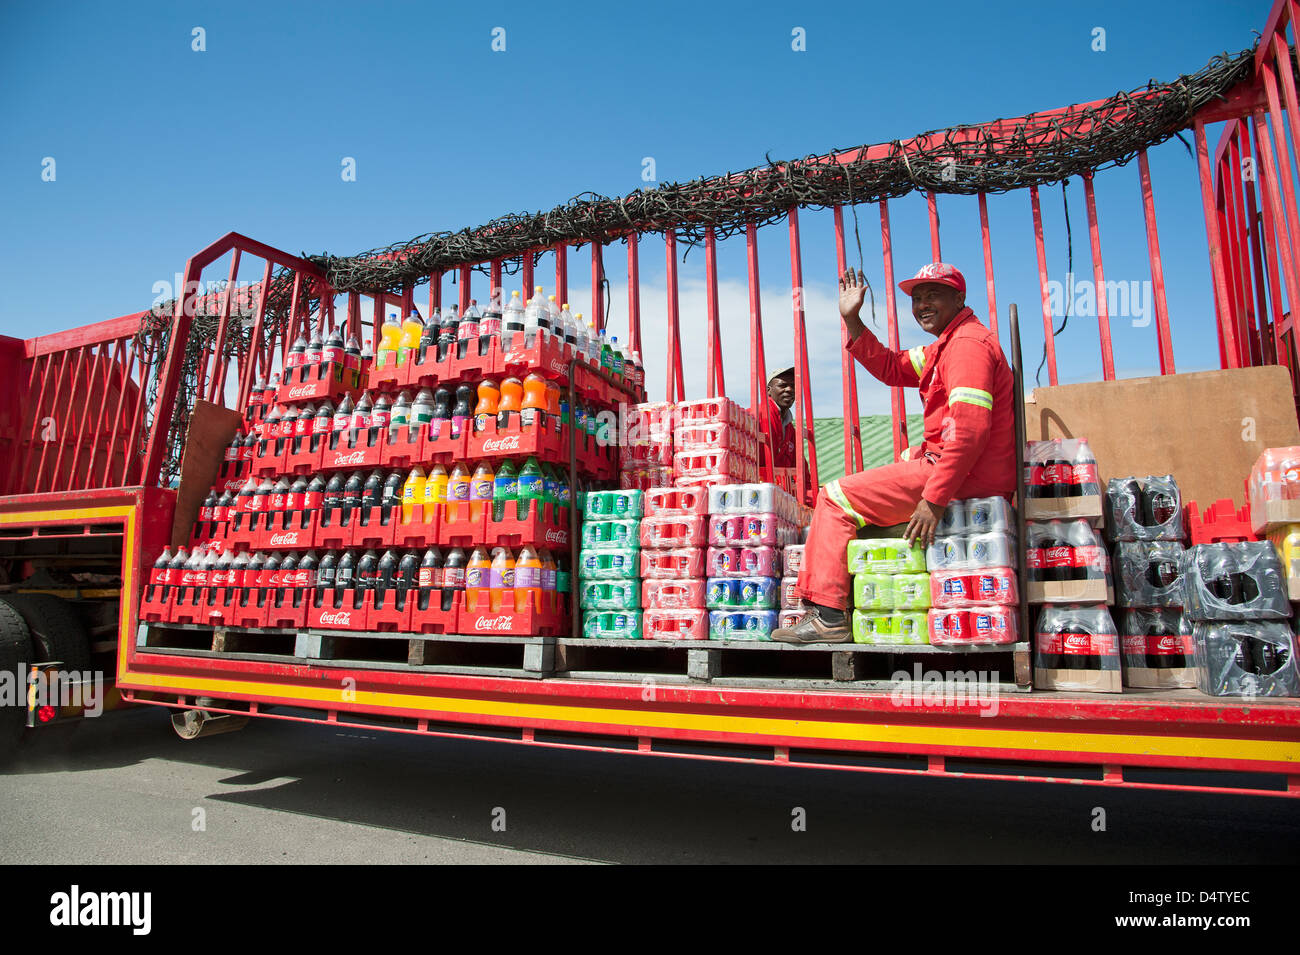 Soft drinks delivery men on their truck delivering cans and bottles of drink Stock Photo